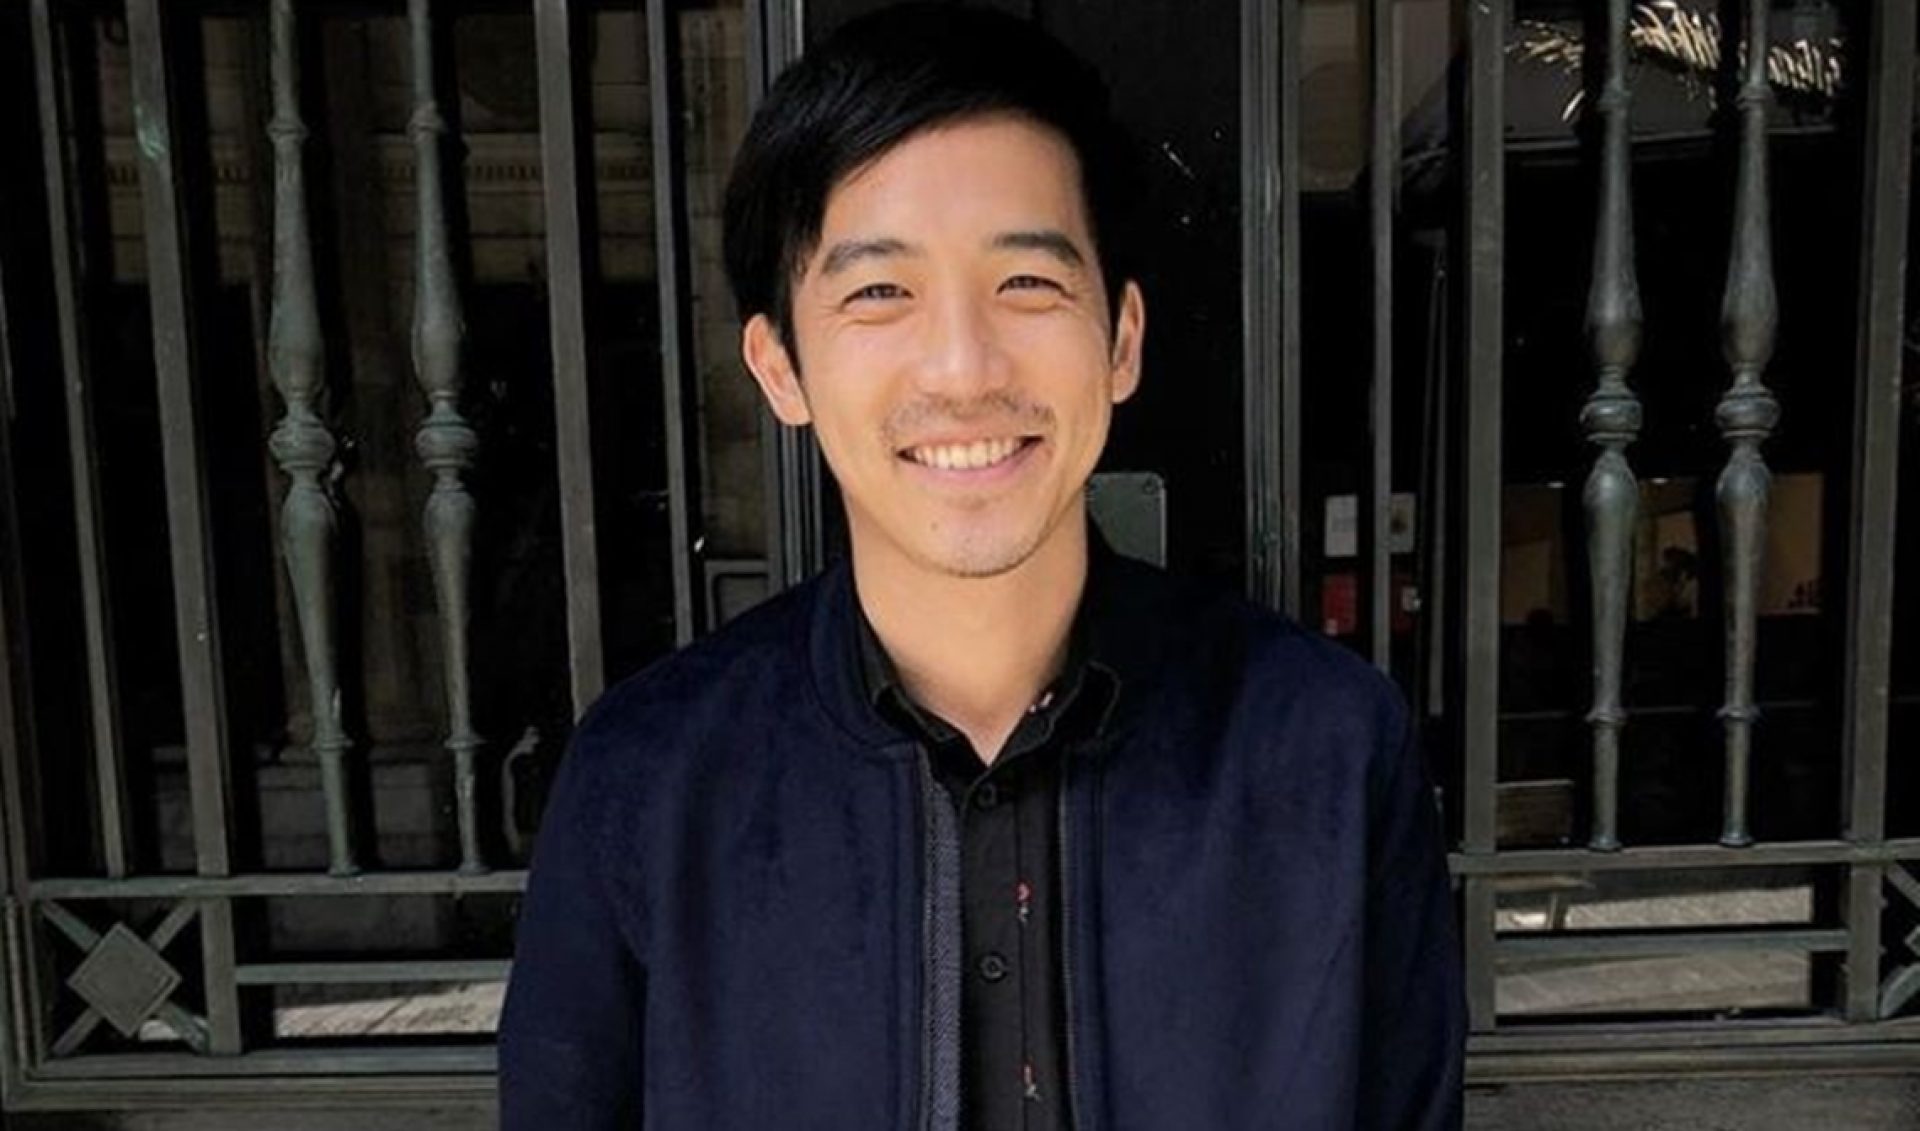 YouTube Star Jimmy Wong Cast In Disney’s Live-Action ‘Mulan’ Adaptation, Set For 2020